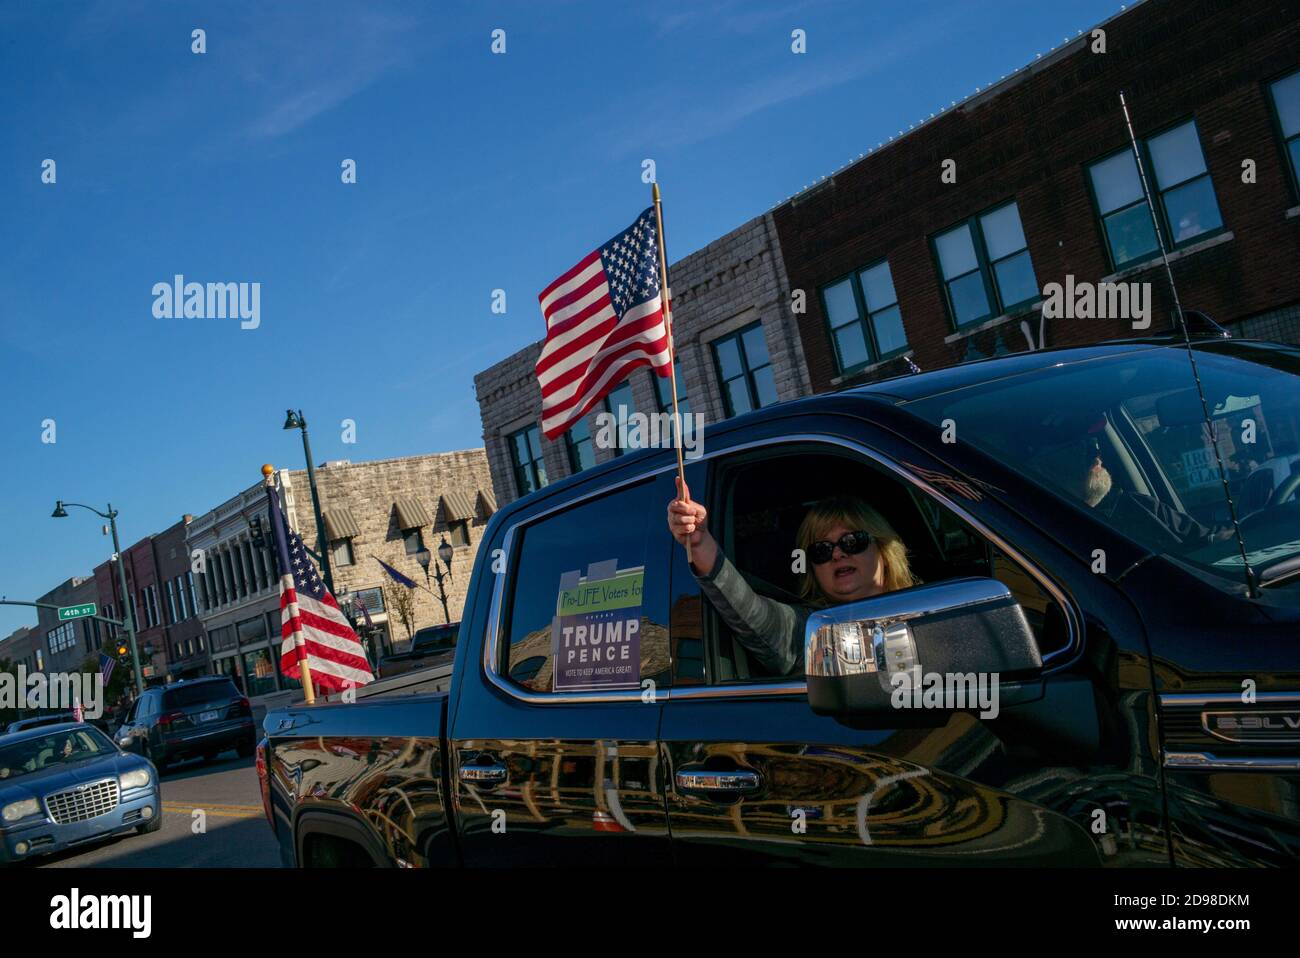 Manhattan, Kansas, USA. 1st Nov, 2020. Trump supporters wave to onlookers on Poyntz Avenue on Sunday during a Trump Parade. Heartland Trump Parades hosted a Trump Parade in Manhattan, Kansas on Sunday where around 165 cars and trucks showed up to show their support for President Donald Trump. The parade started in CiCo Park and drove through Historic downtown on Poyntz Avenue. Credit: Luke Townsend/ZUMA Wire/Alamy Live News Stock Photo